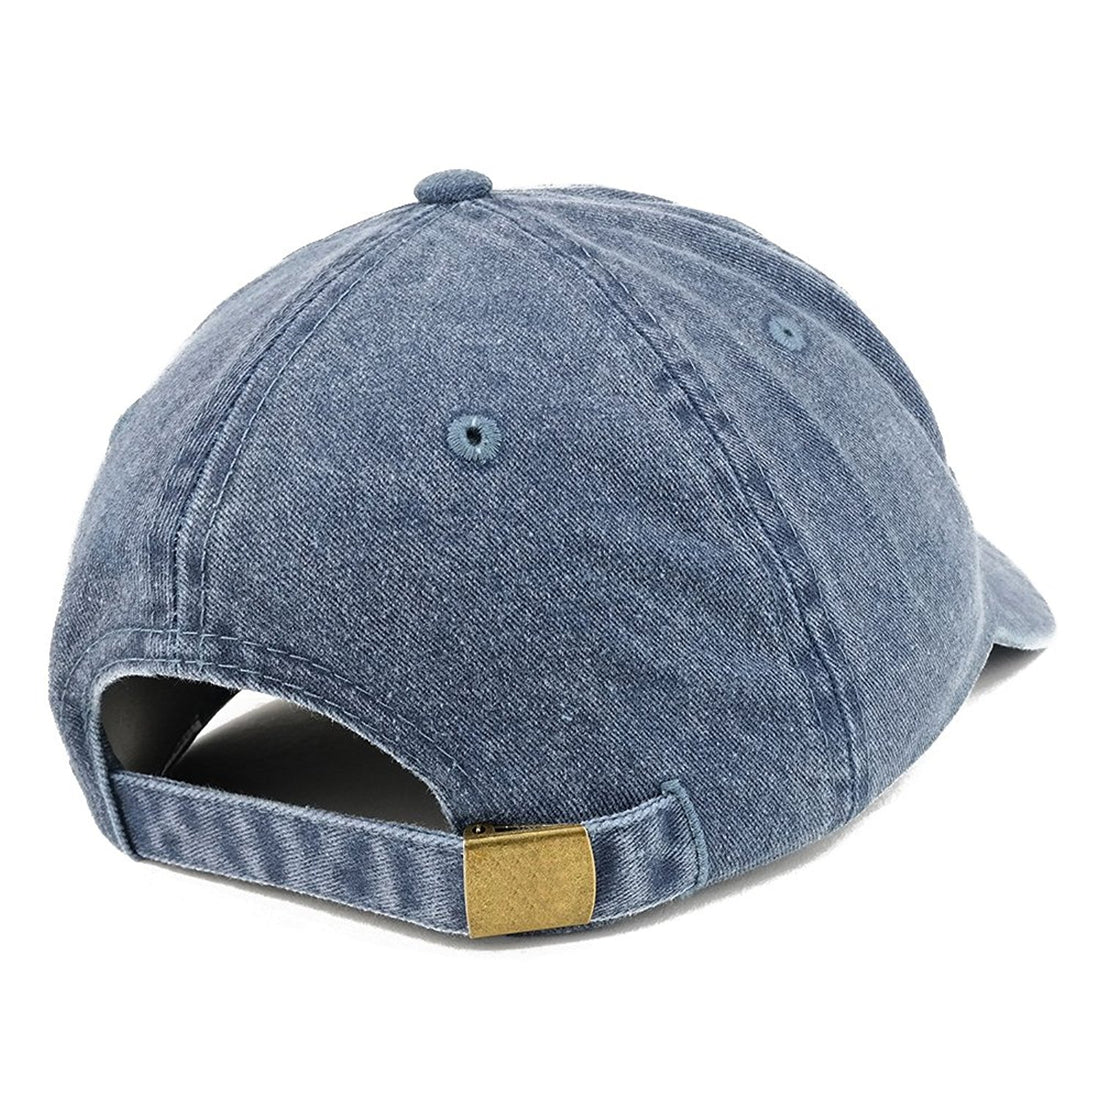 Trendy Apparel Shop Established 1972 Embroidered 47th Birthday Gift Pigment Dyed Washed Cotton Cap